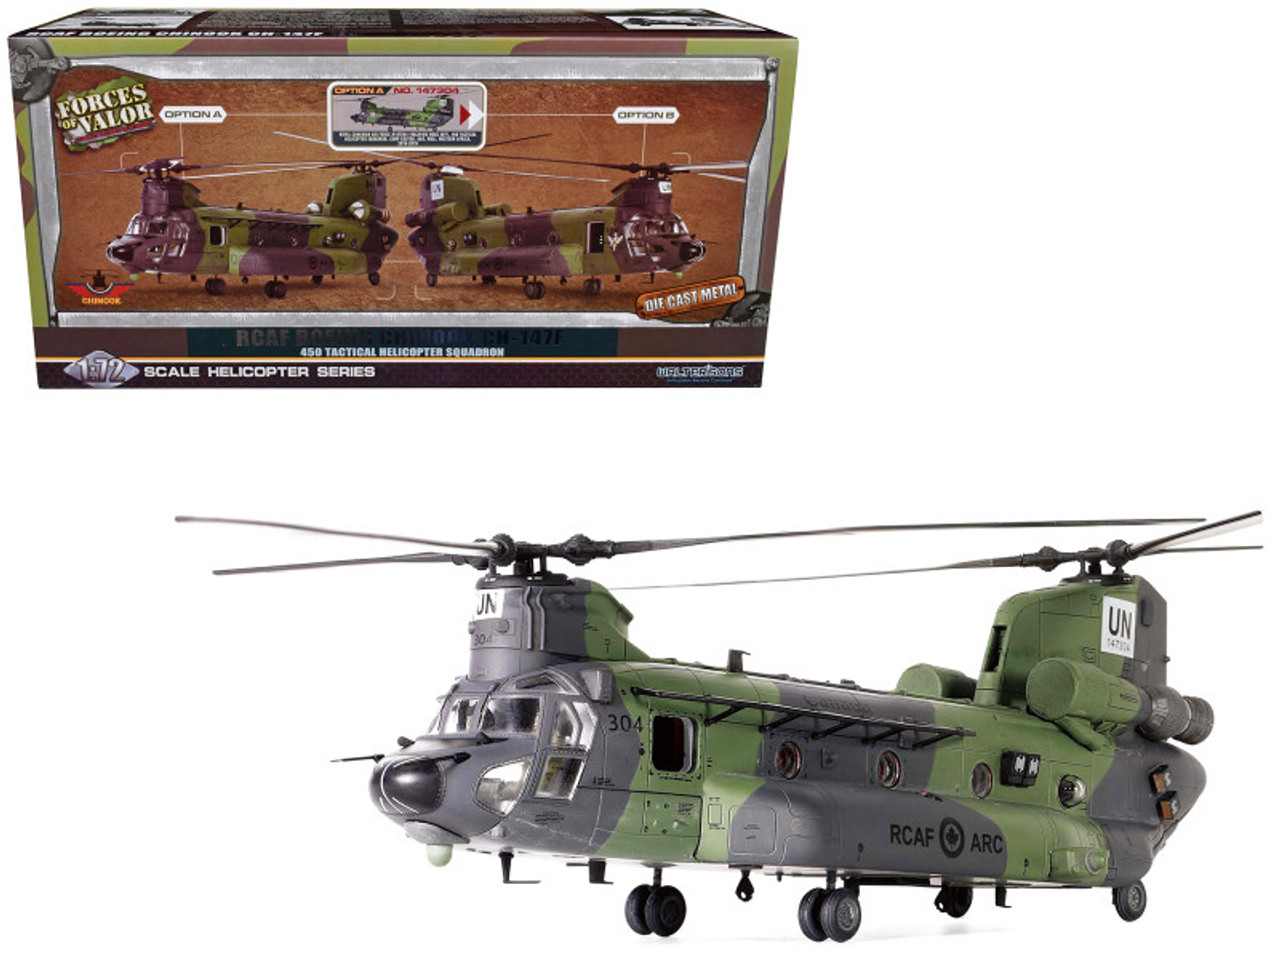 Boeing Chinook CH-147F Helicopter "Royal Canadian Air Force #147304 (Valkyrie Nose Art) 450 Tactical Helicopter Squadron Camp Castor Gao Mali Western Africa" (2018-2019) 1/72 Diecast Model by Forces of Valor